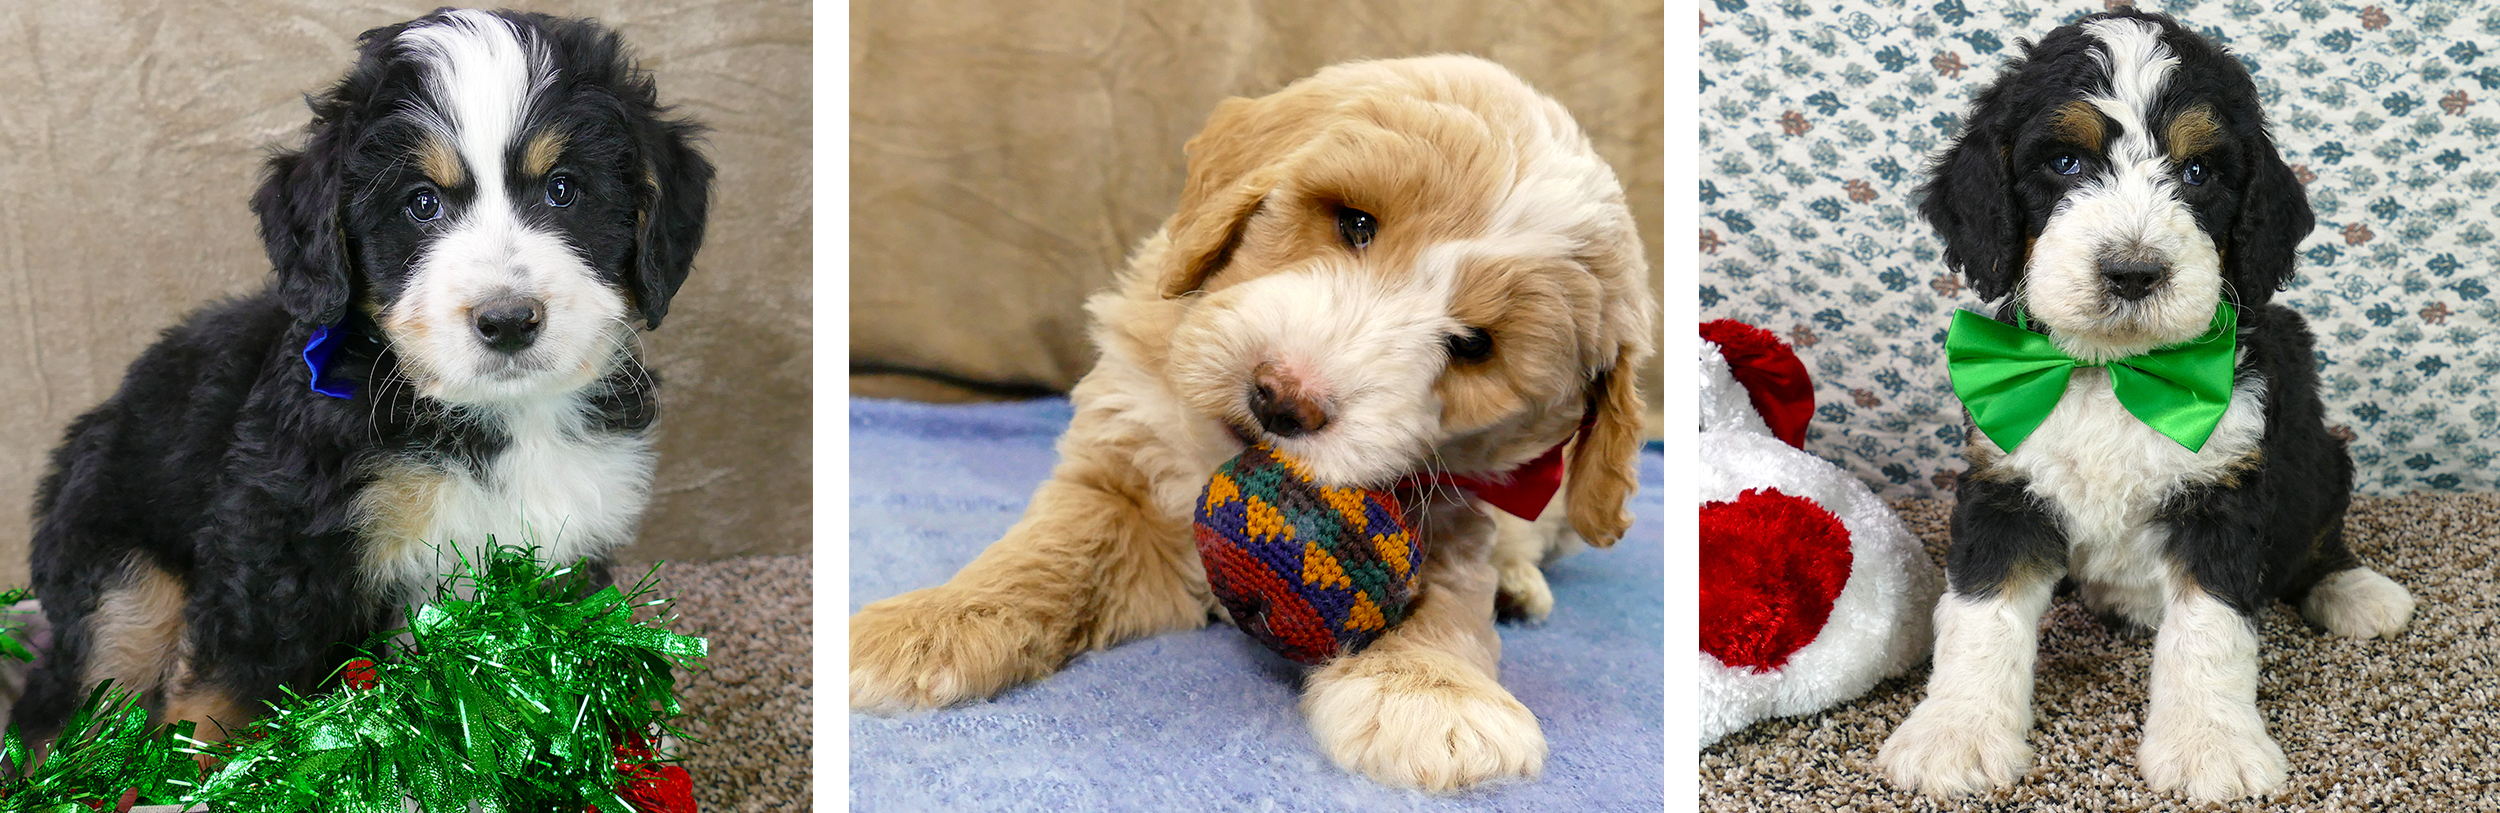 Three adorable puppies - two tri-color Bernedoodles and a Goldendoodle